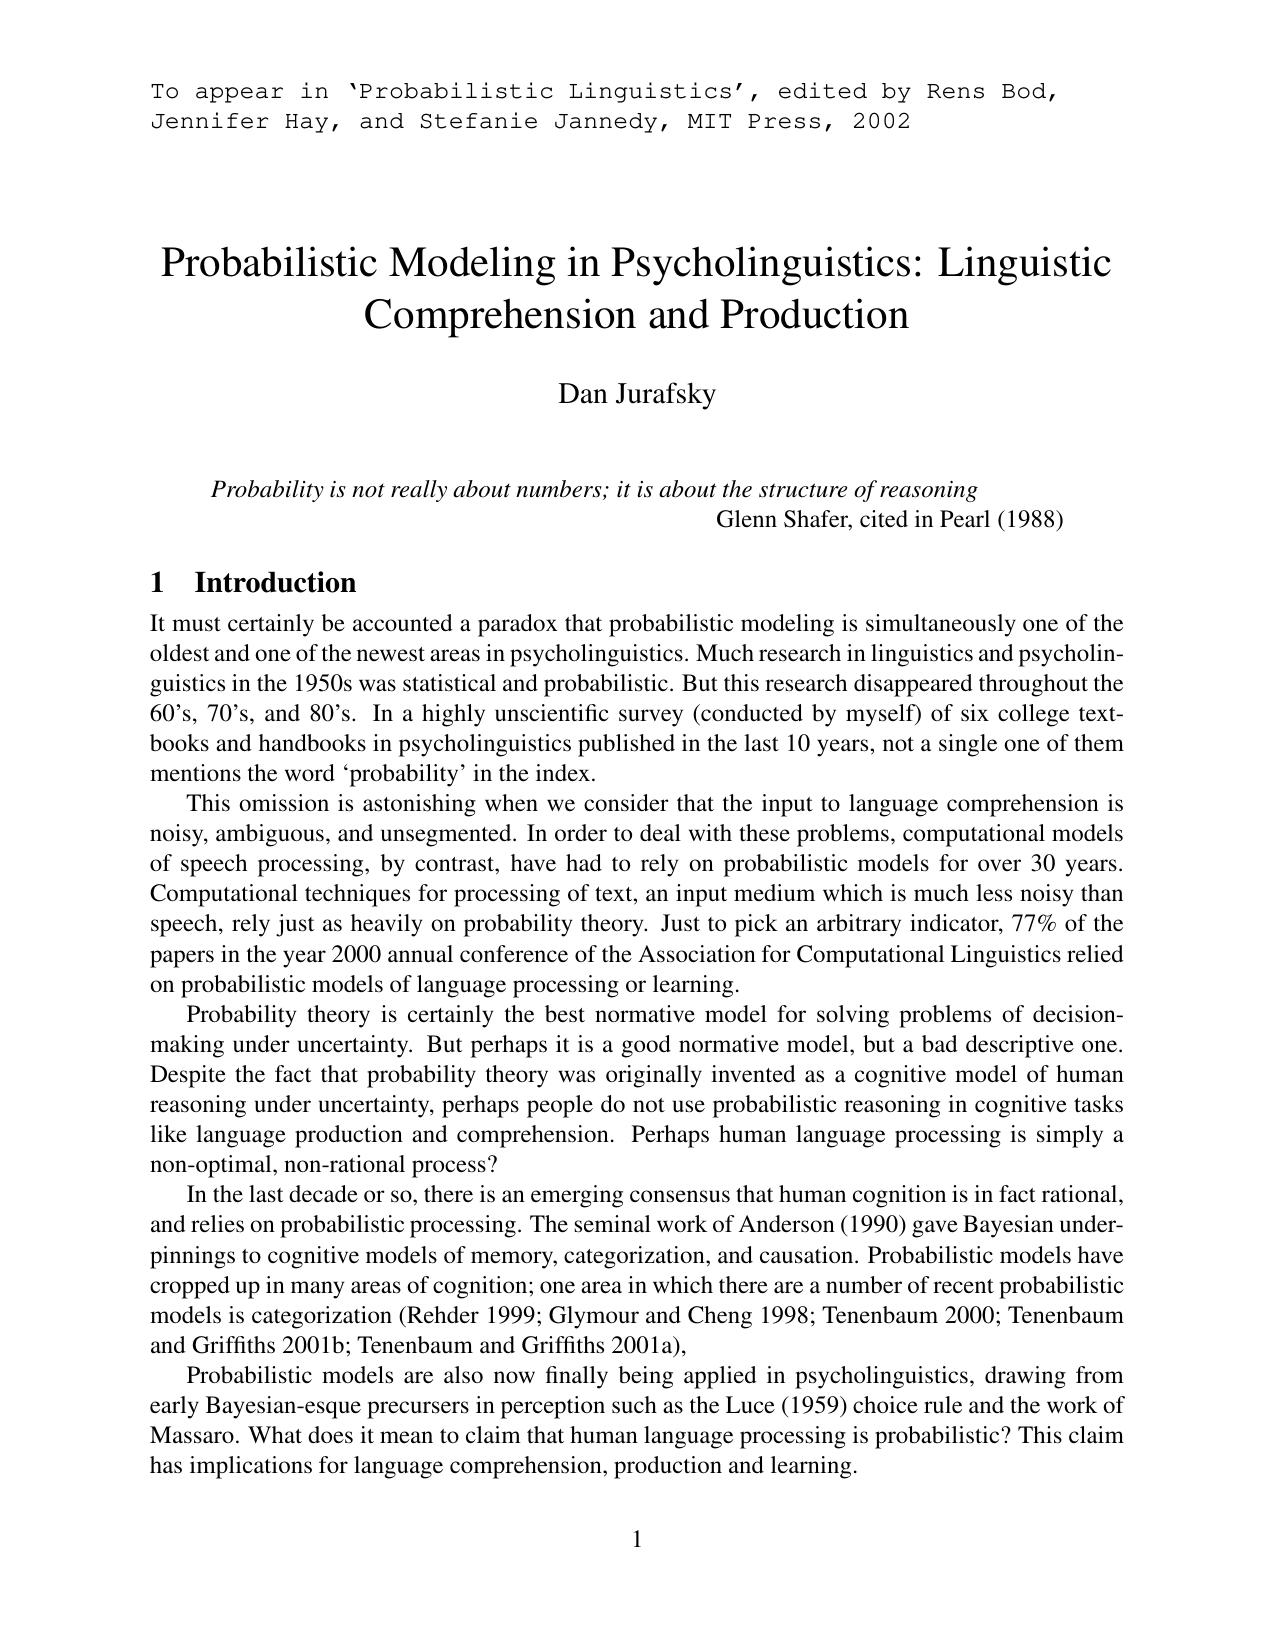 Jurafsky - Probabalistic Modeling in Psycholinguistics - Linguistic Comprehension and Production - Essay